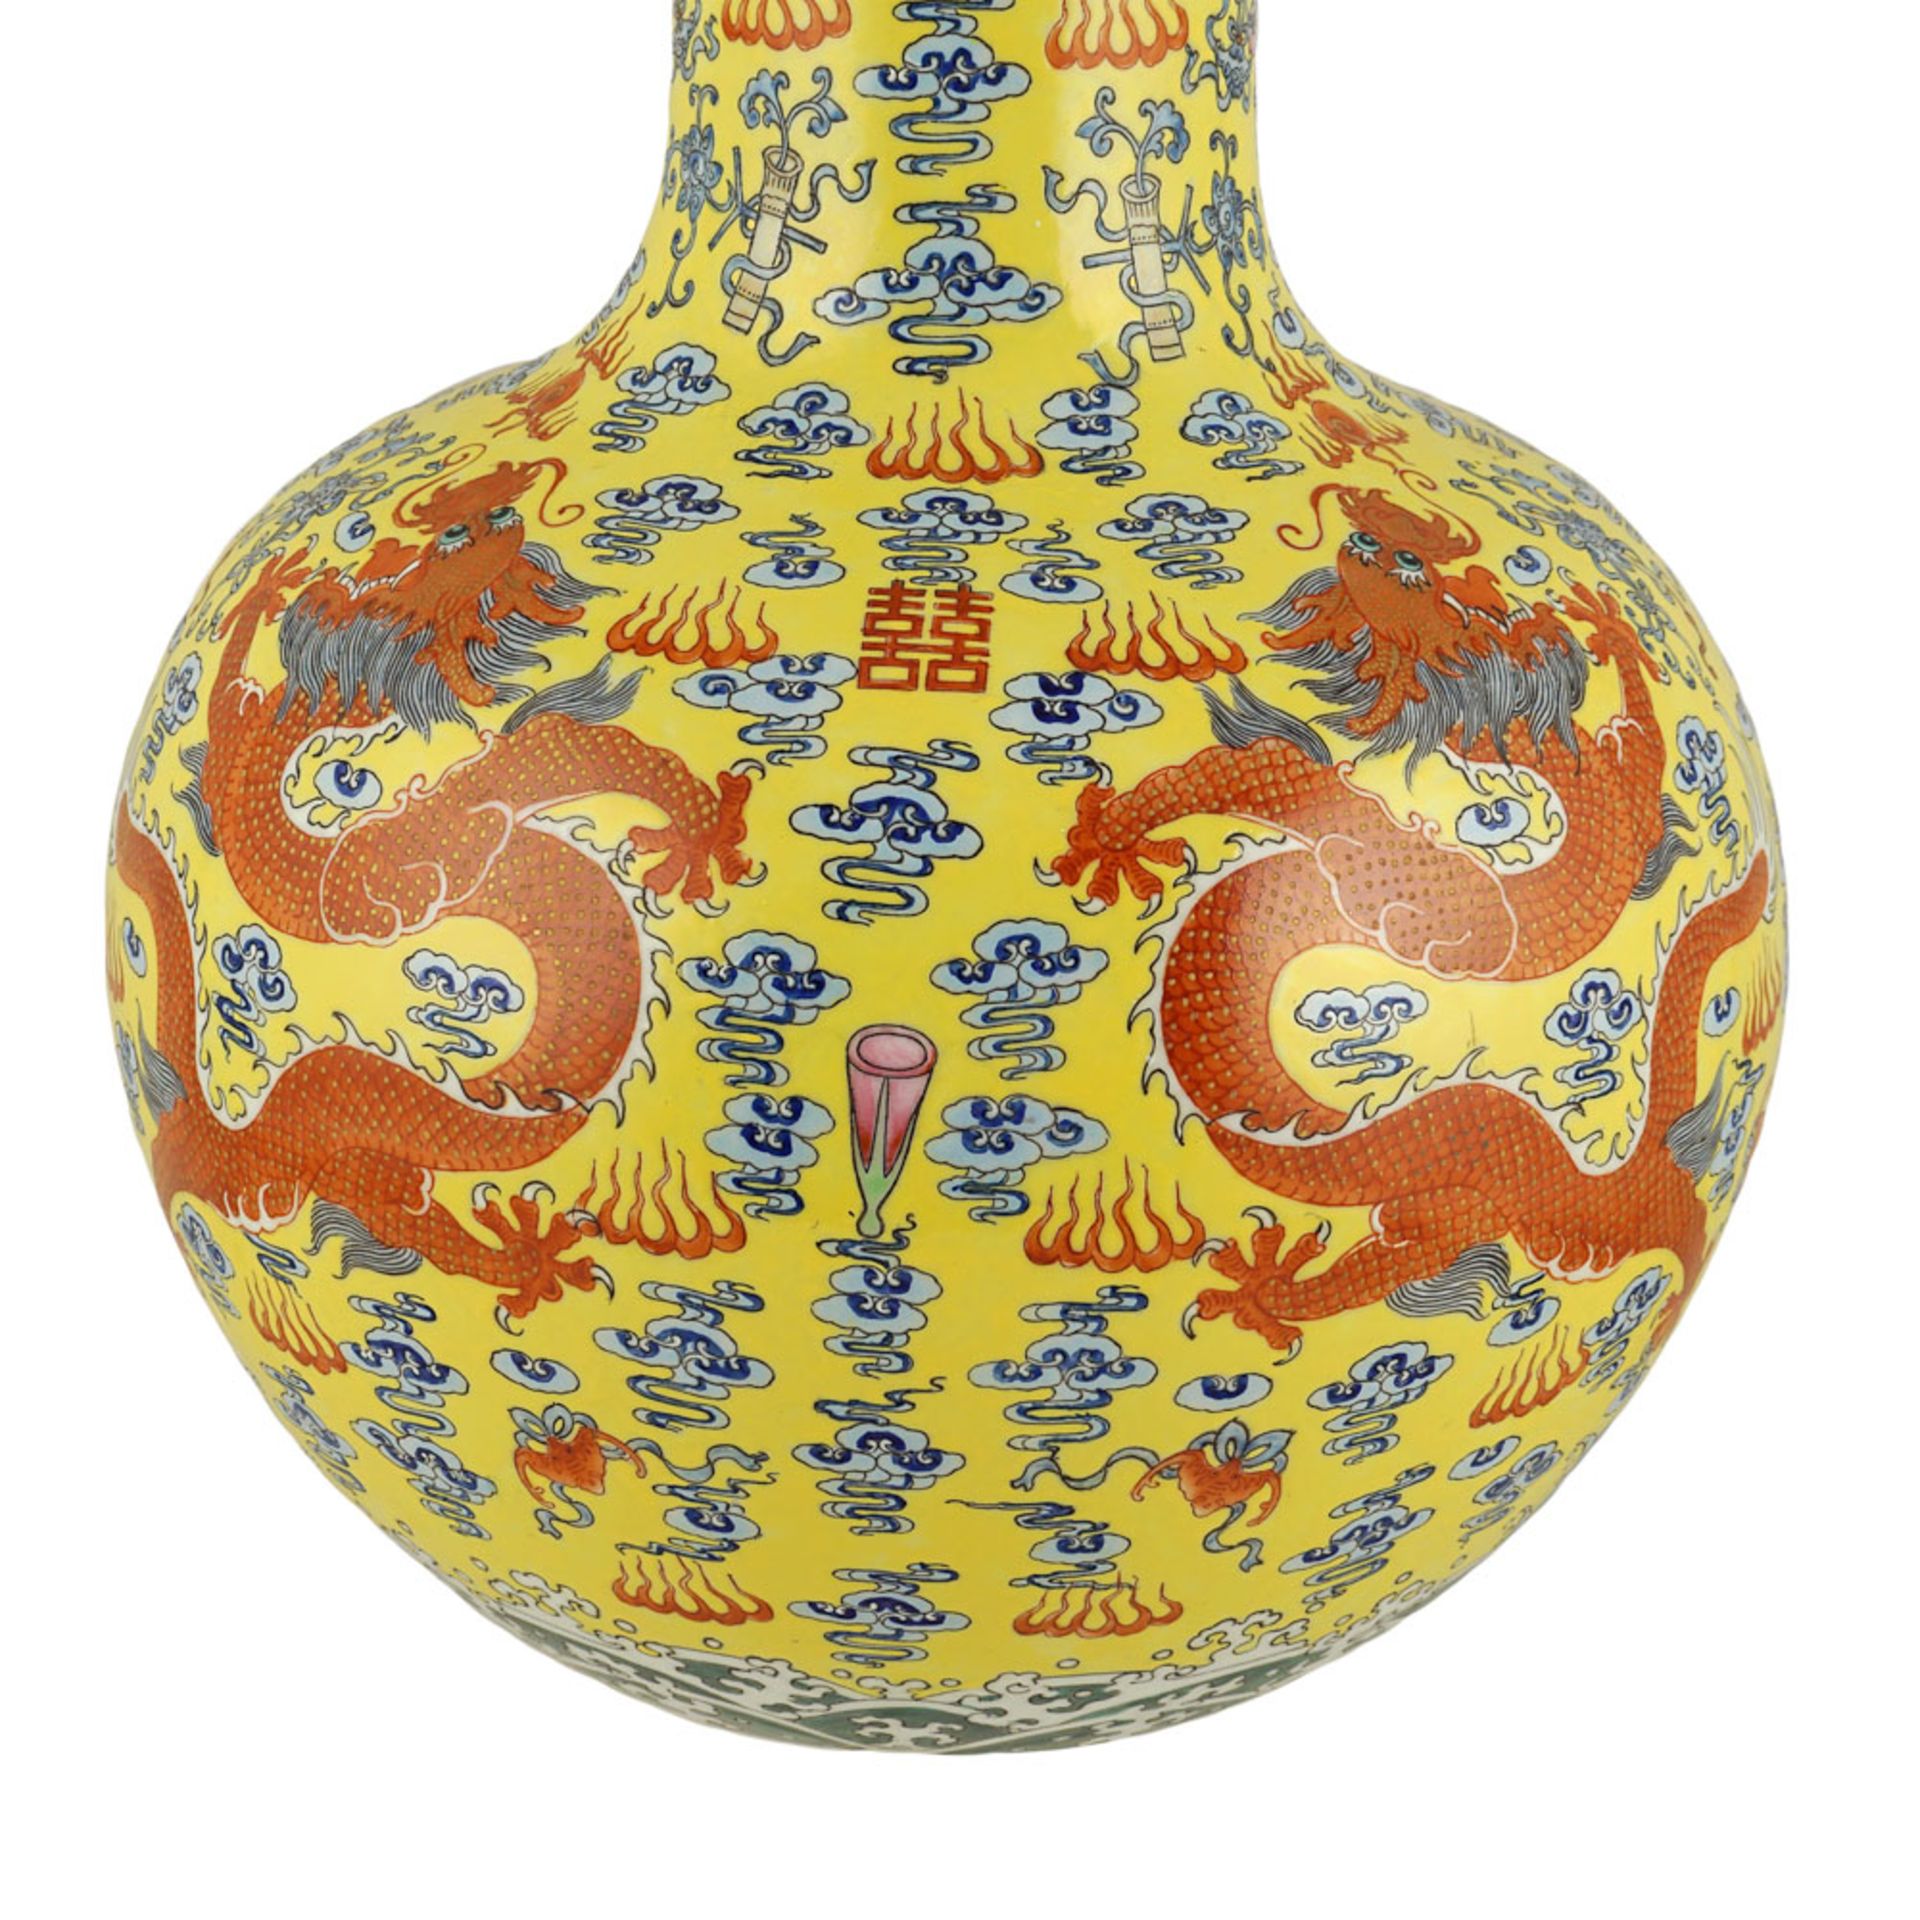 Pair of rose family porcelain vases, China Qing dinasty Tongzhi mark and period (1862 - 1874) h. 42 - Image 2 of 3